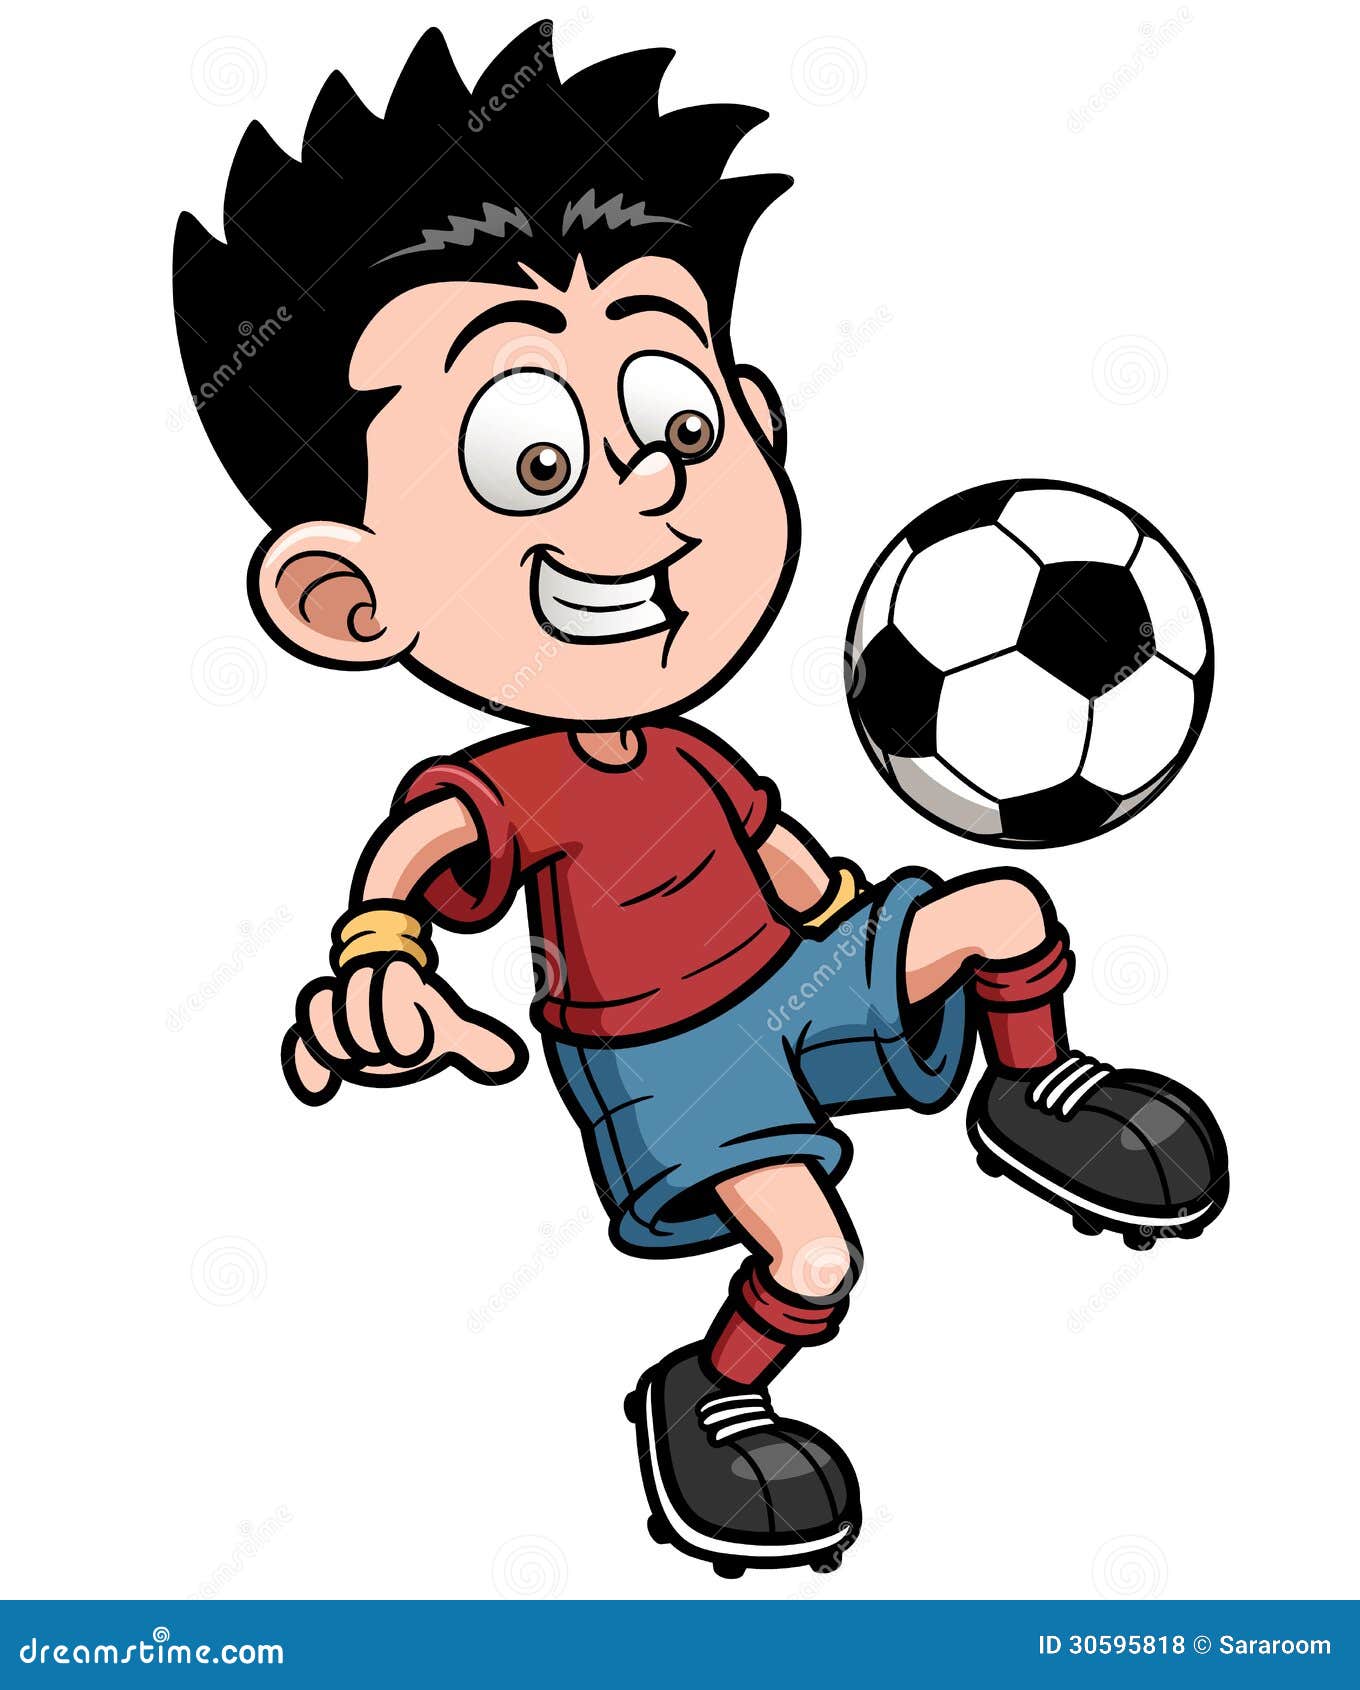 Soccer Player Royalty Free Stock Photos - Image: 30595818